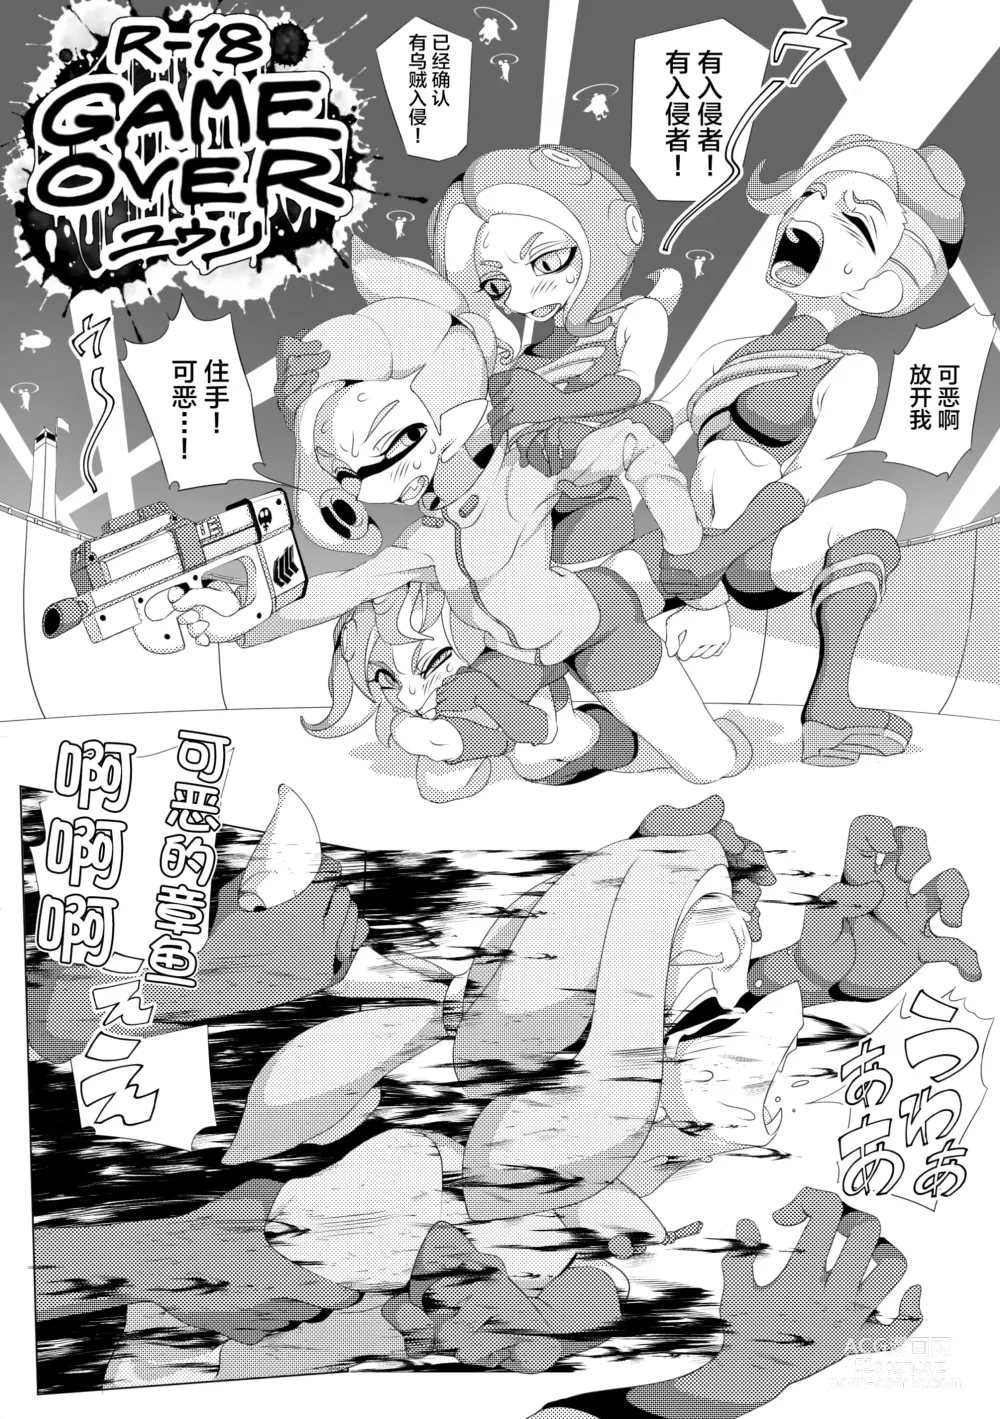 Page 1 of doujinshi GAME OVER